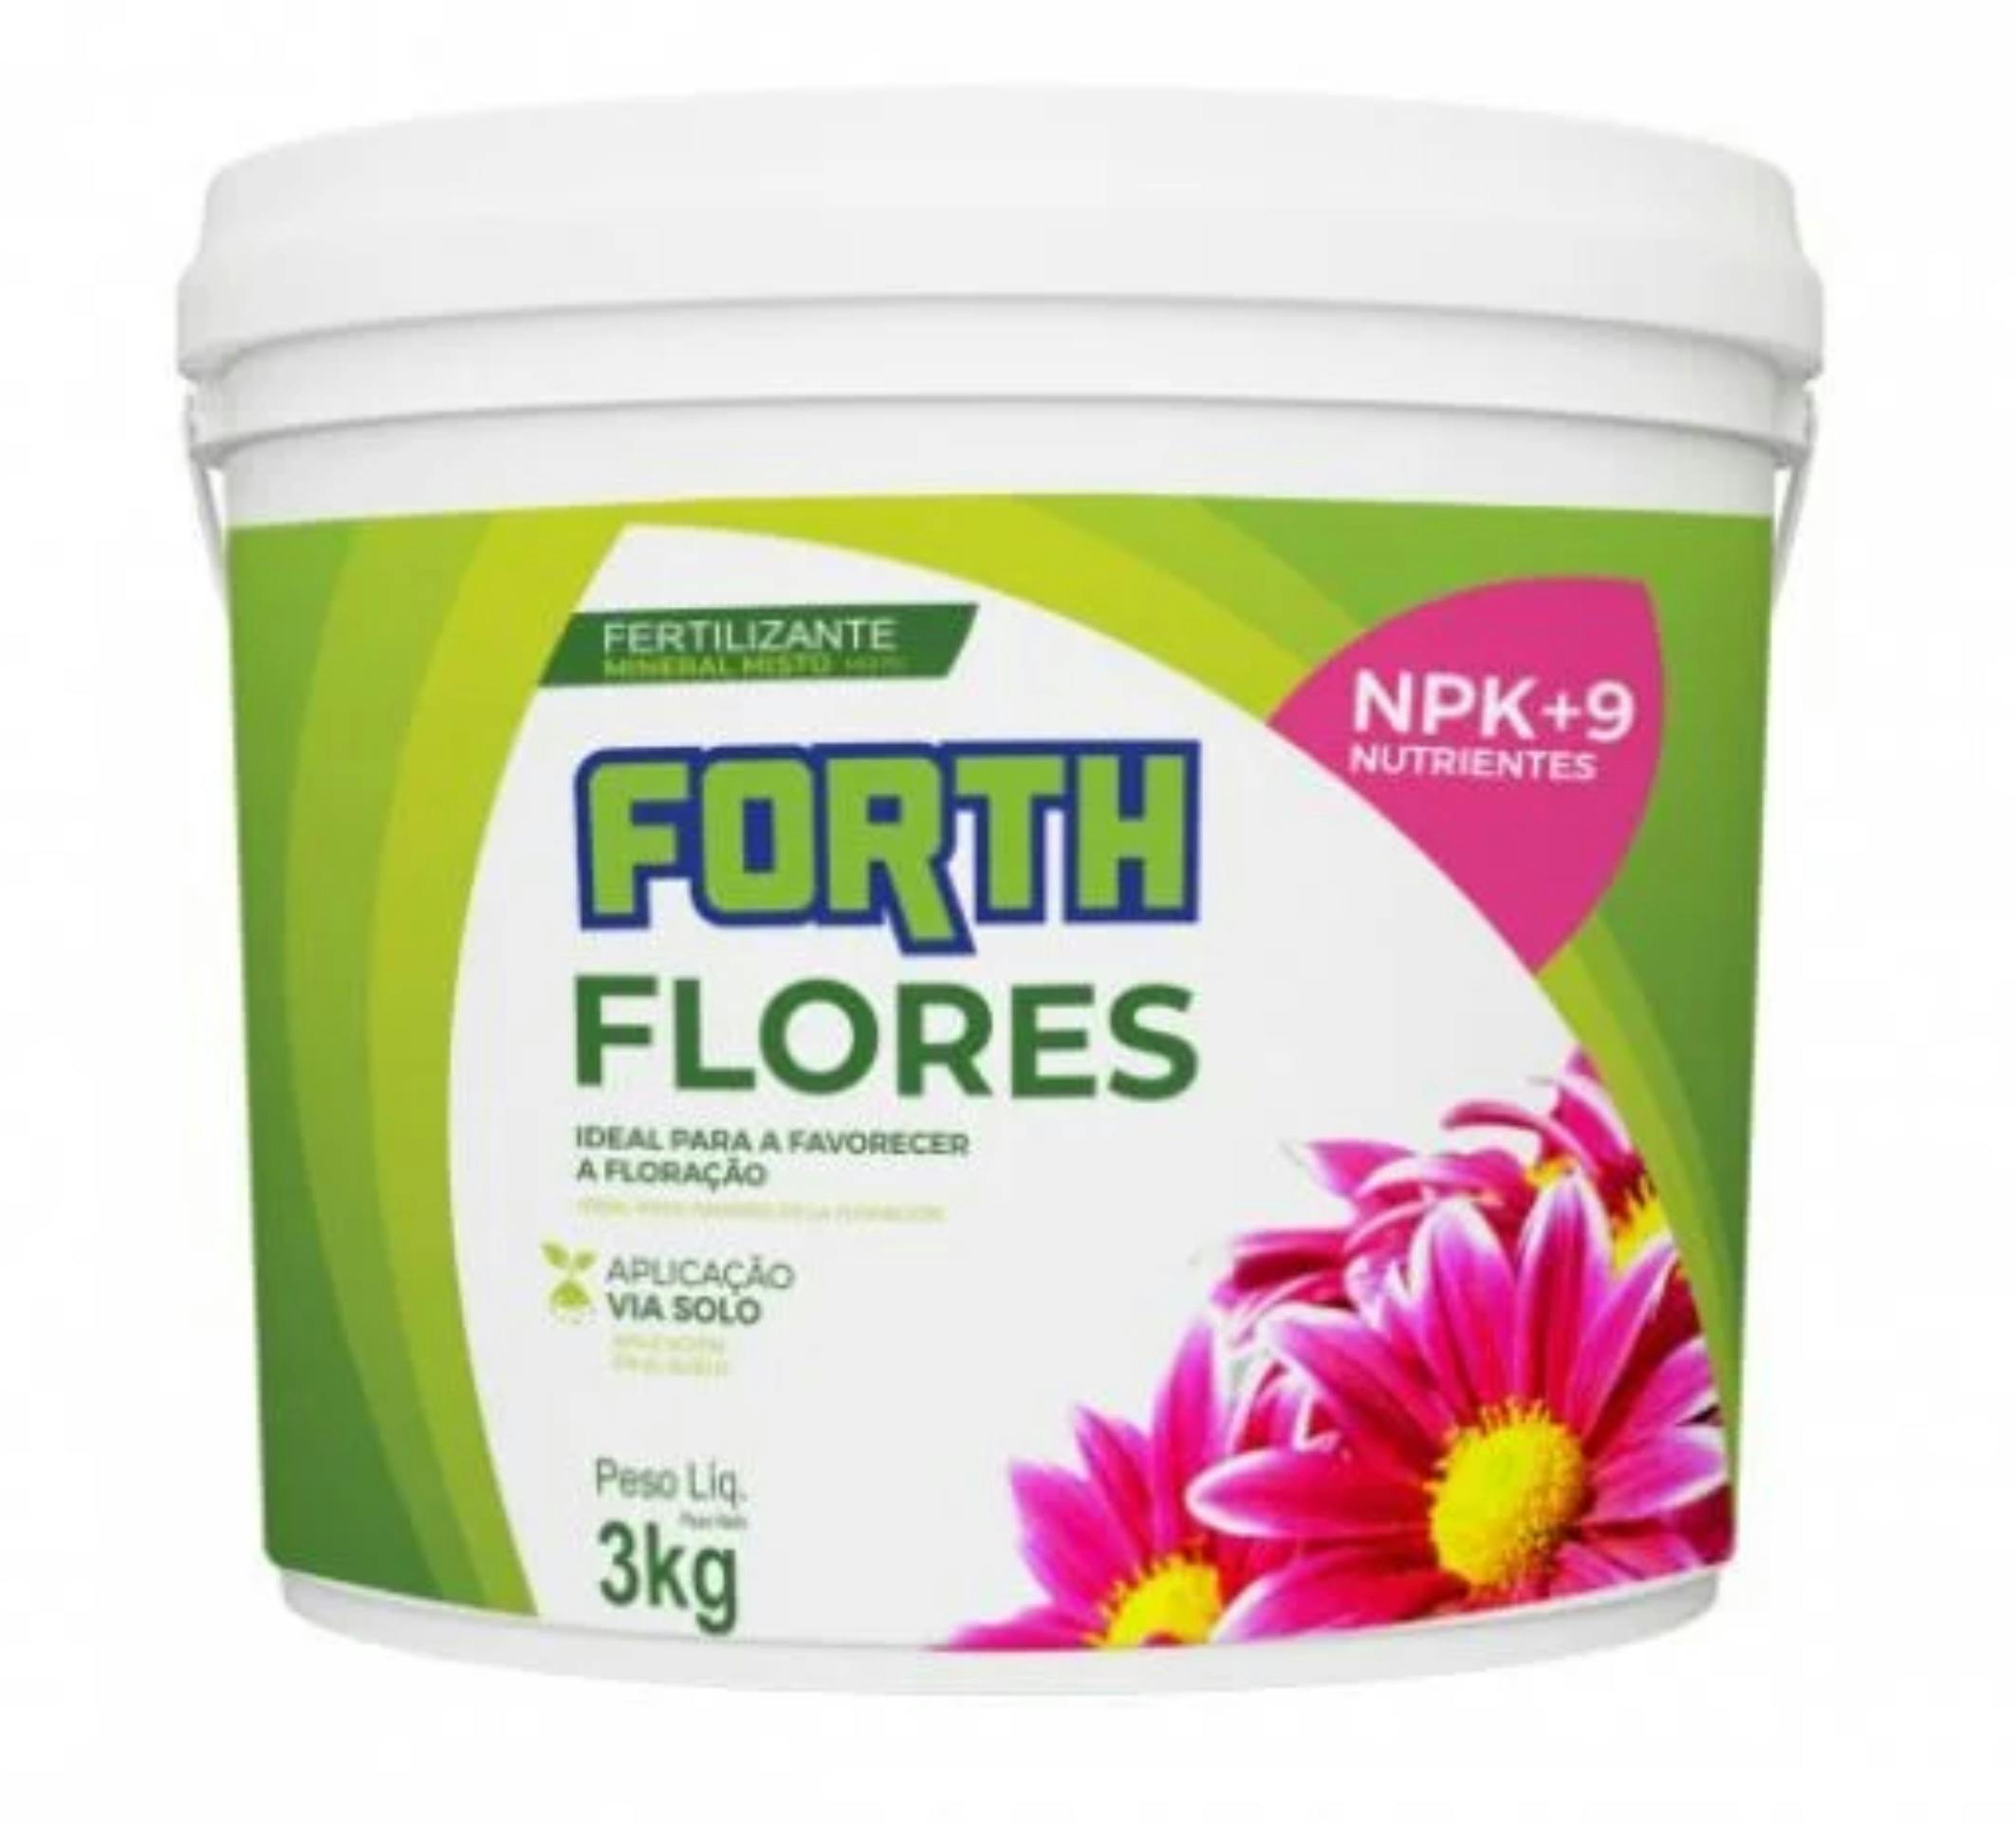 FORTH FLORES